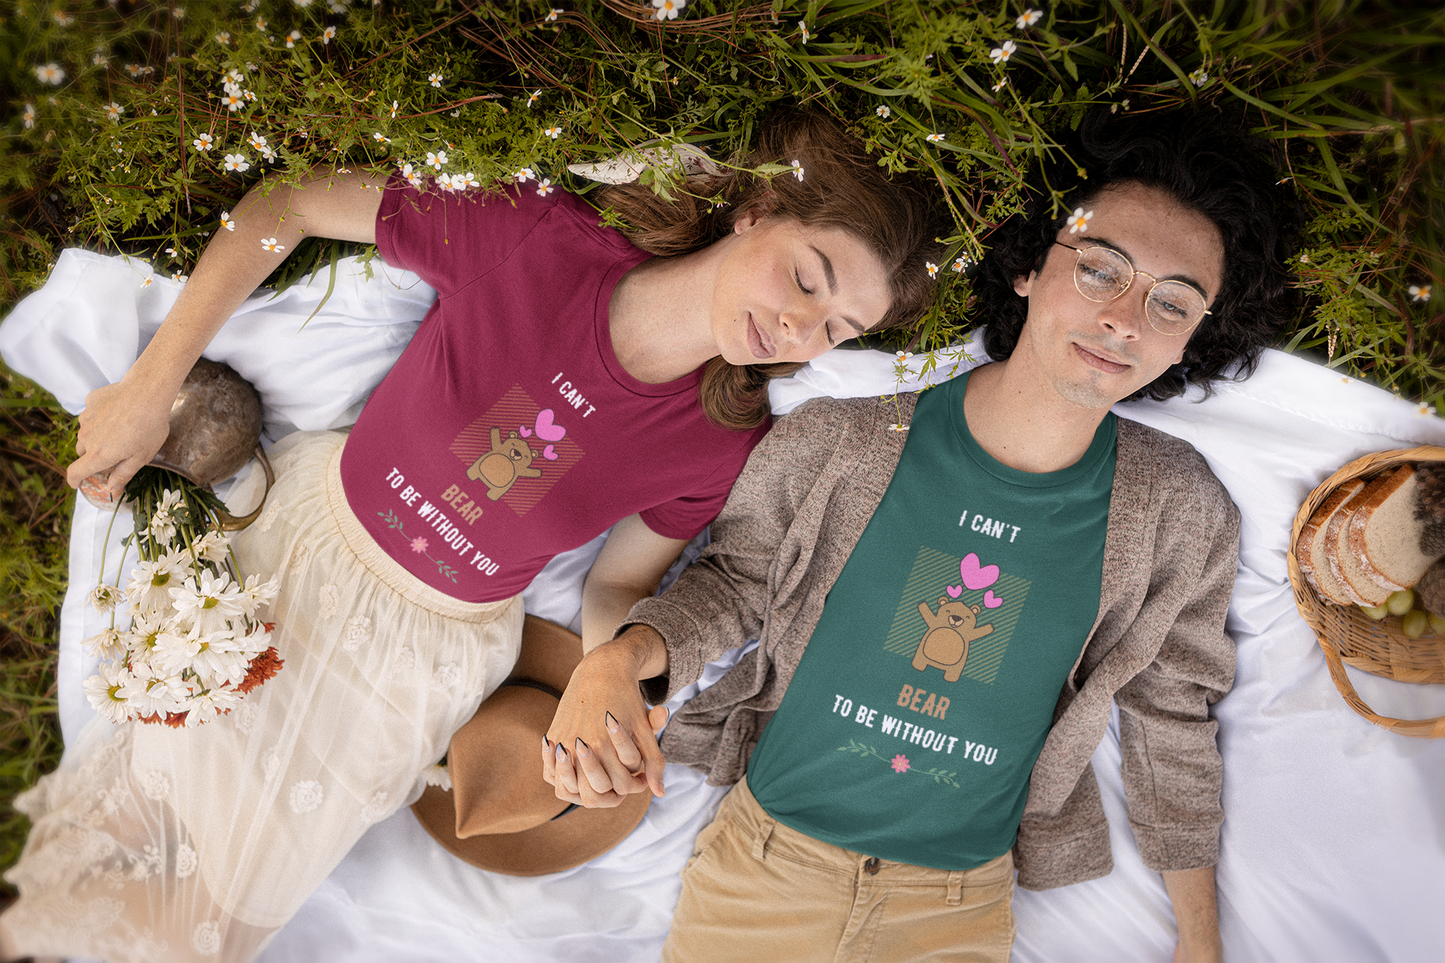 Can't bear to be without you - Premium cotton tee celebrating love...